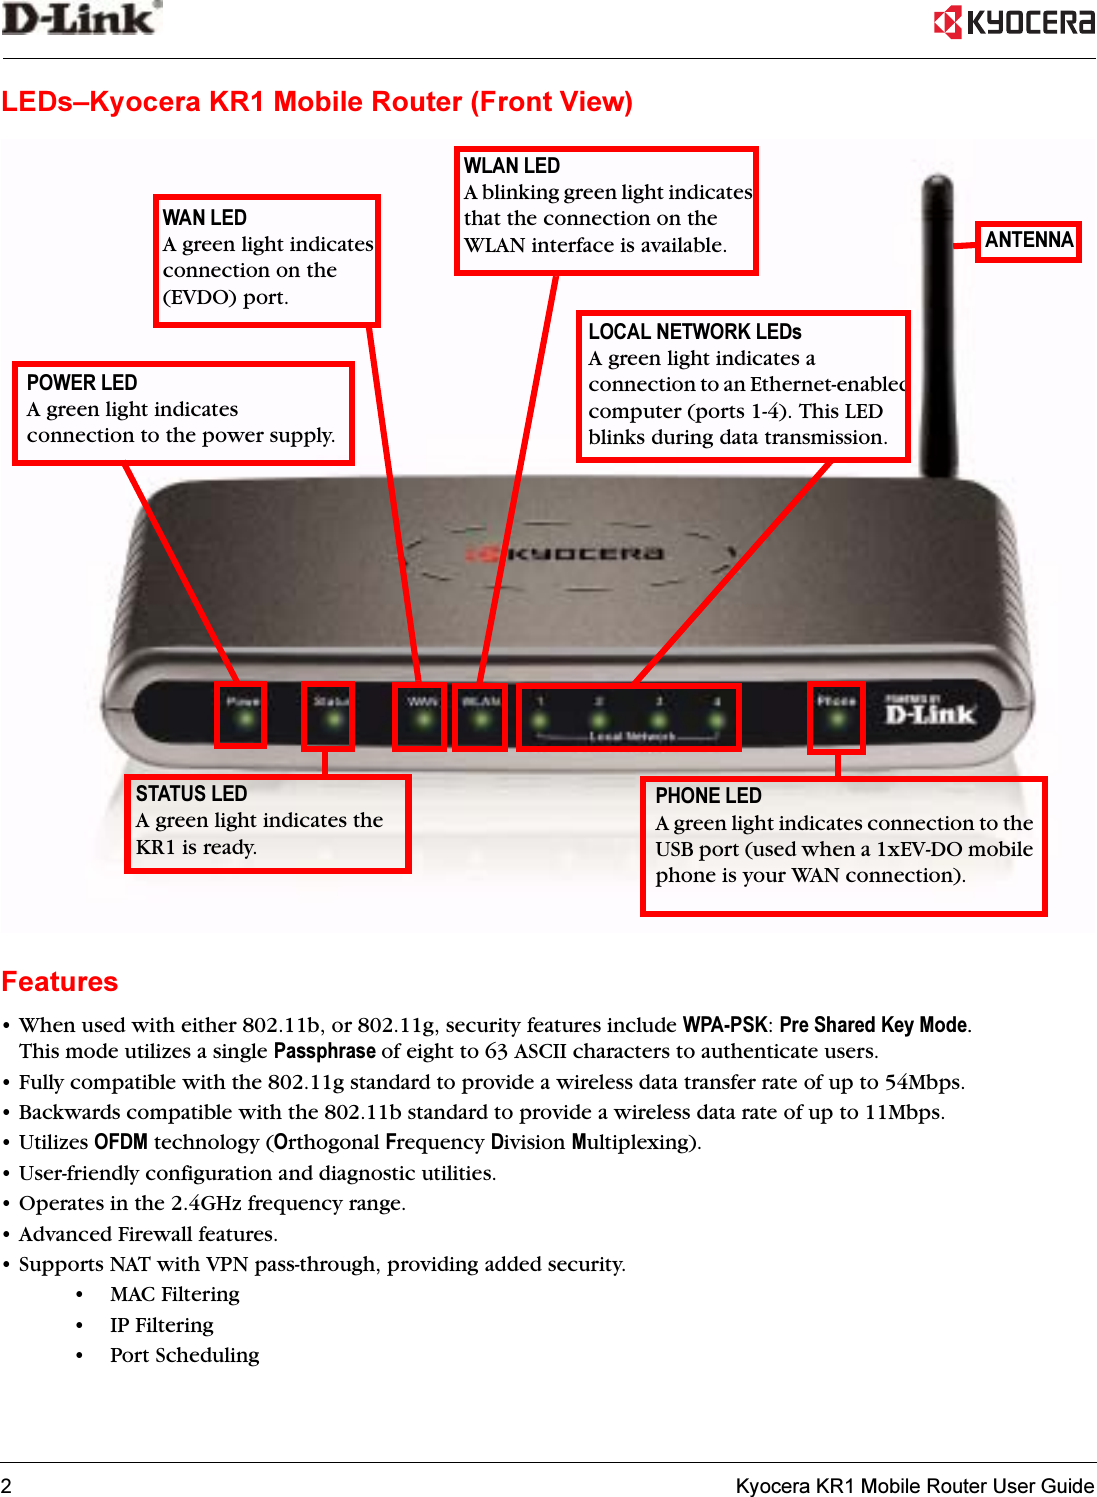 2   Kyocera KR1 Mobile Router User GuideLEDs–Kyocera KR1 Mobile Router (Front View)Features• When used with either 802.11b, or 802.11g, security features include WPA-PSK:Pre Shared Key Mode.This mode utilizes a single Passphrase of eight to 63 ASCII characters to authenticate users. • Fully compatible with the 802.11g standard to provide a wireless data transfer rate of up to 54Mbps.• Backwards compatible with the 802.11b standard to provide a wireless data rate of up to 11Mbps.• Utilizes OFDM technology (Orthogonal Frequency Division Multiplexing).• User-friendly configuration and diagnostic utilities.• Operates in the 2.4GHz frequency range.• Advanced Firewall features.• Supports NAT with VPN pass-through, providing added security.•MAC Filtering• IP Filtering•Port SchedulingWAN LEDA green light indicates connection on the (EVDO) port. WLAN LEDA blinking green light indicates that the connection on the WLAN interface is available. PHONE LEDA green light indicates connection to the USB port (used when a 1xEV-DO mobile phone is your WAN connection).STATUS LEDA green light indicates the KR1 is ready.LOCAL NETWORK LEDsA green light indicates a connection to an Ethernet-enabled computer (ports 1-4). This LED blinks during data transmission.POWER LEDA green light indicates connection to the power supply.ANTENNA